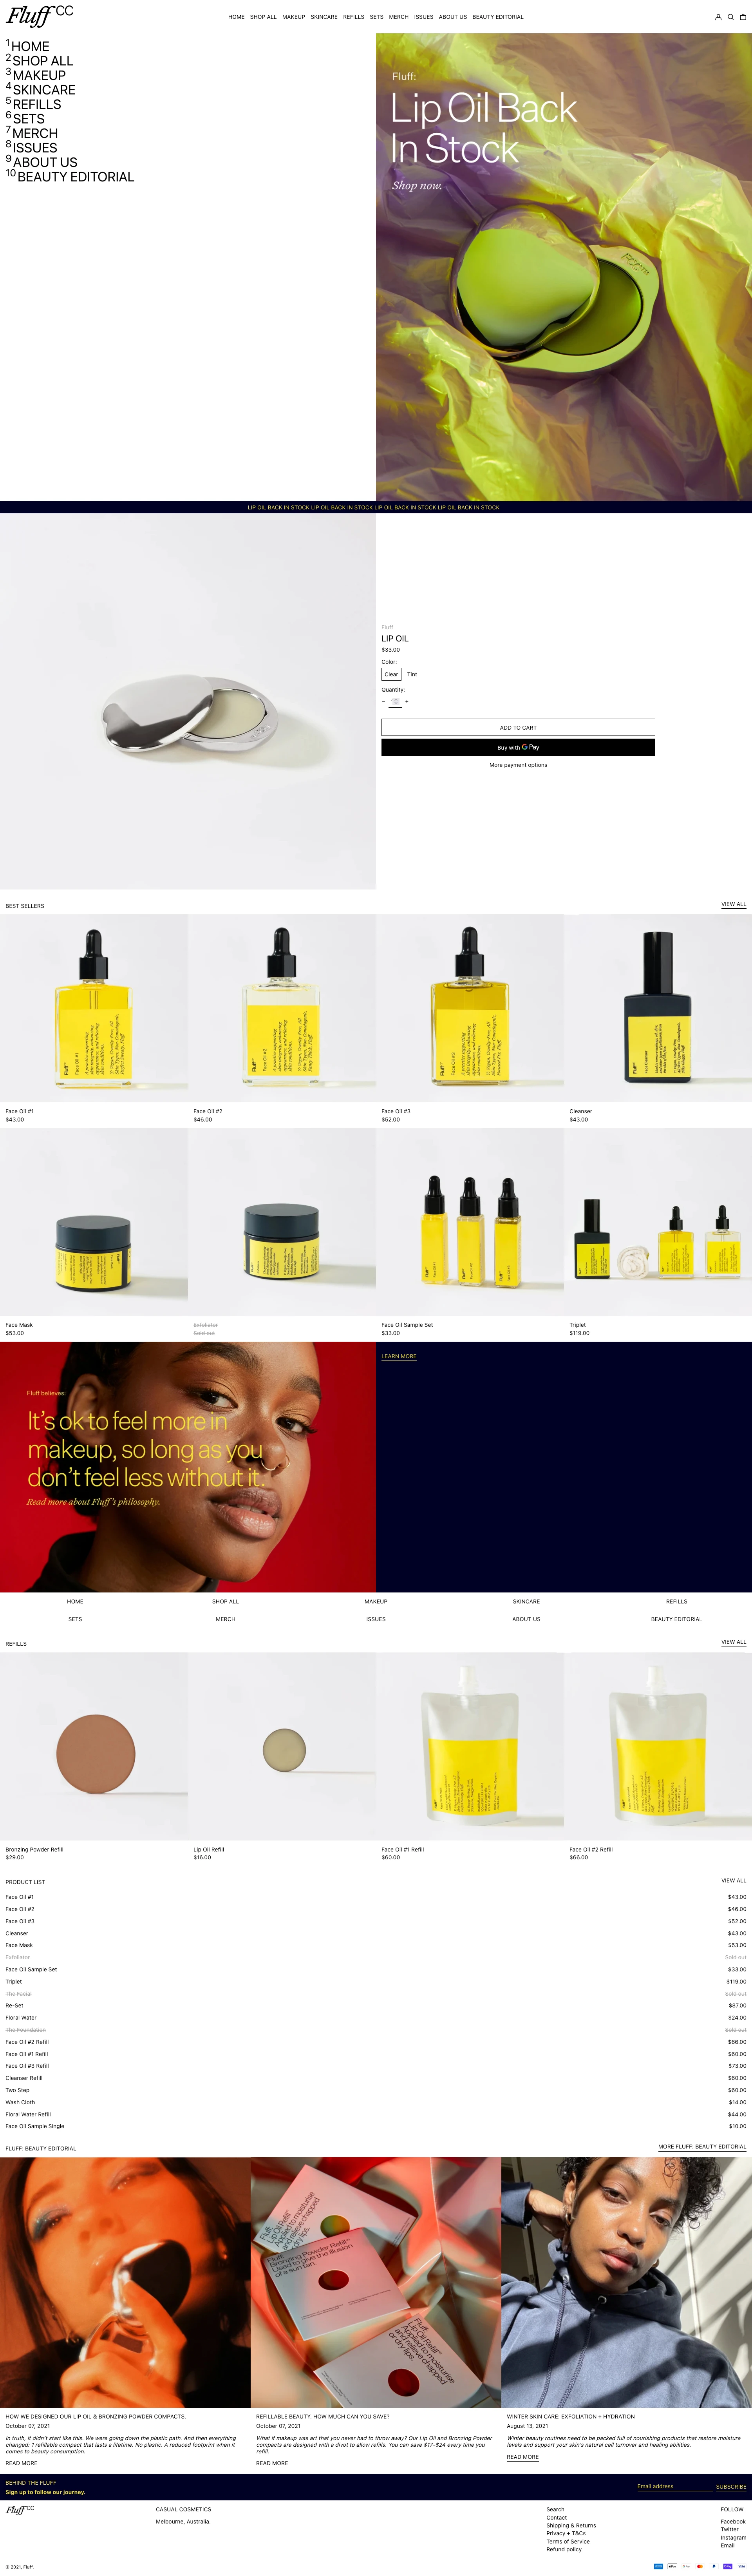 Fluff Landing Page Example: Refillable, Vegan, Cruelty-Free Australian owned Beauty and Skincare. It's ok to feel more with makeup, so long as you don't feel less without it.